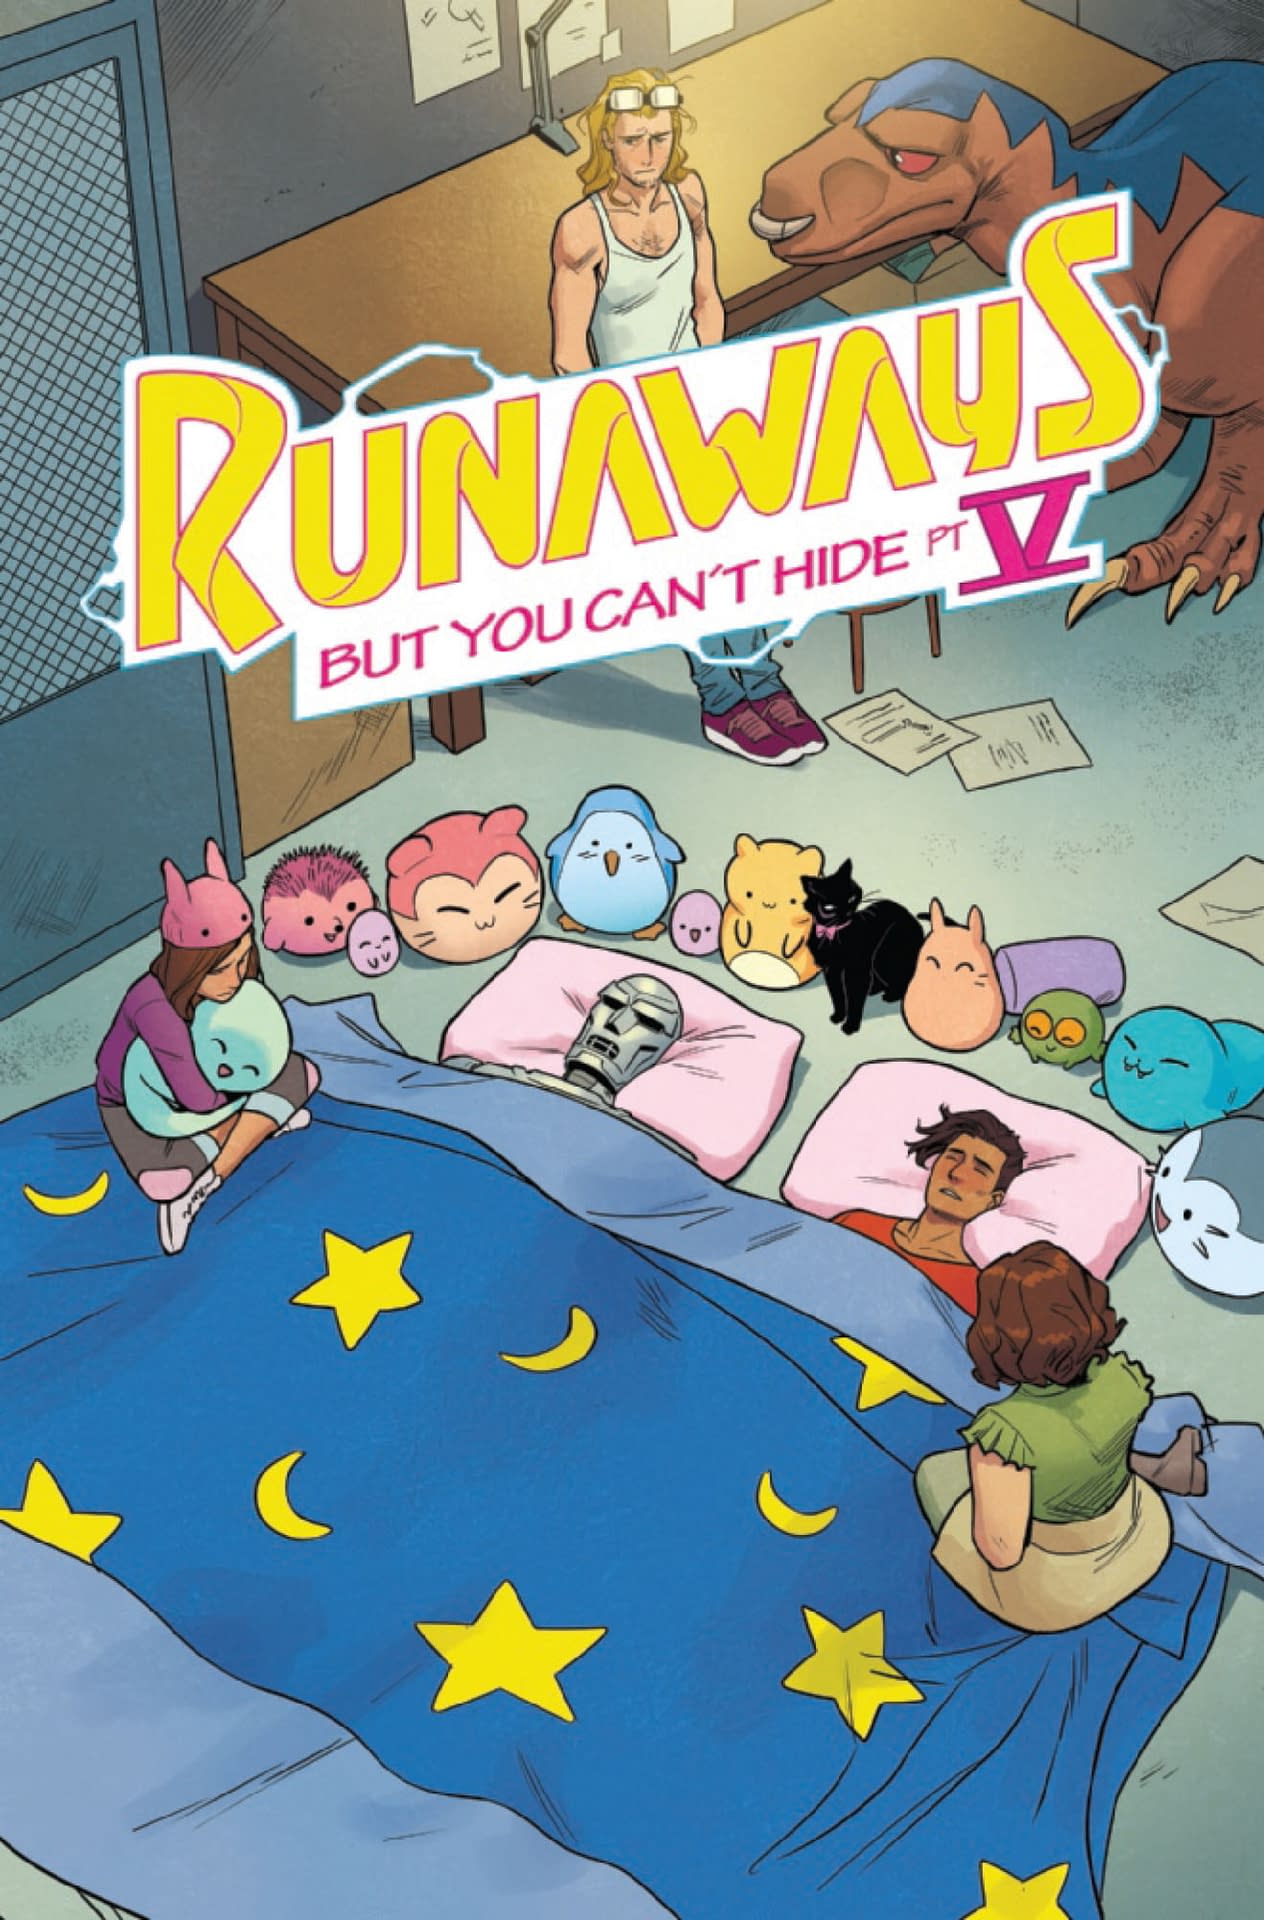 Do Doombots Dream of Electric Sheep? Runaways #23 [Preview]